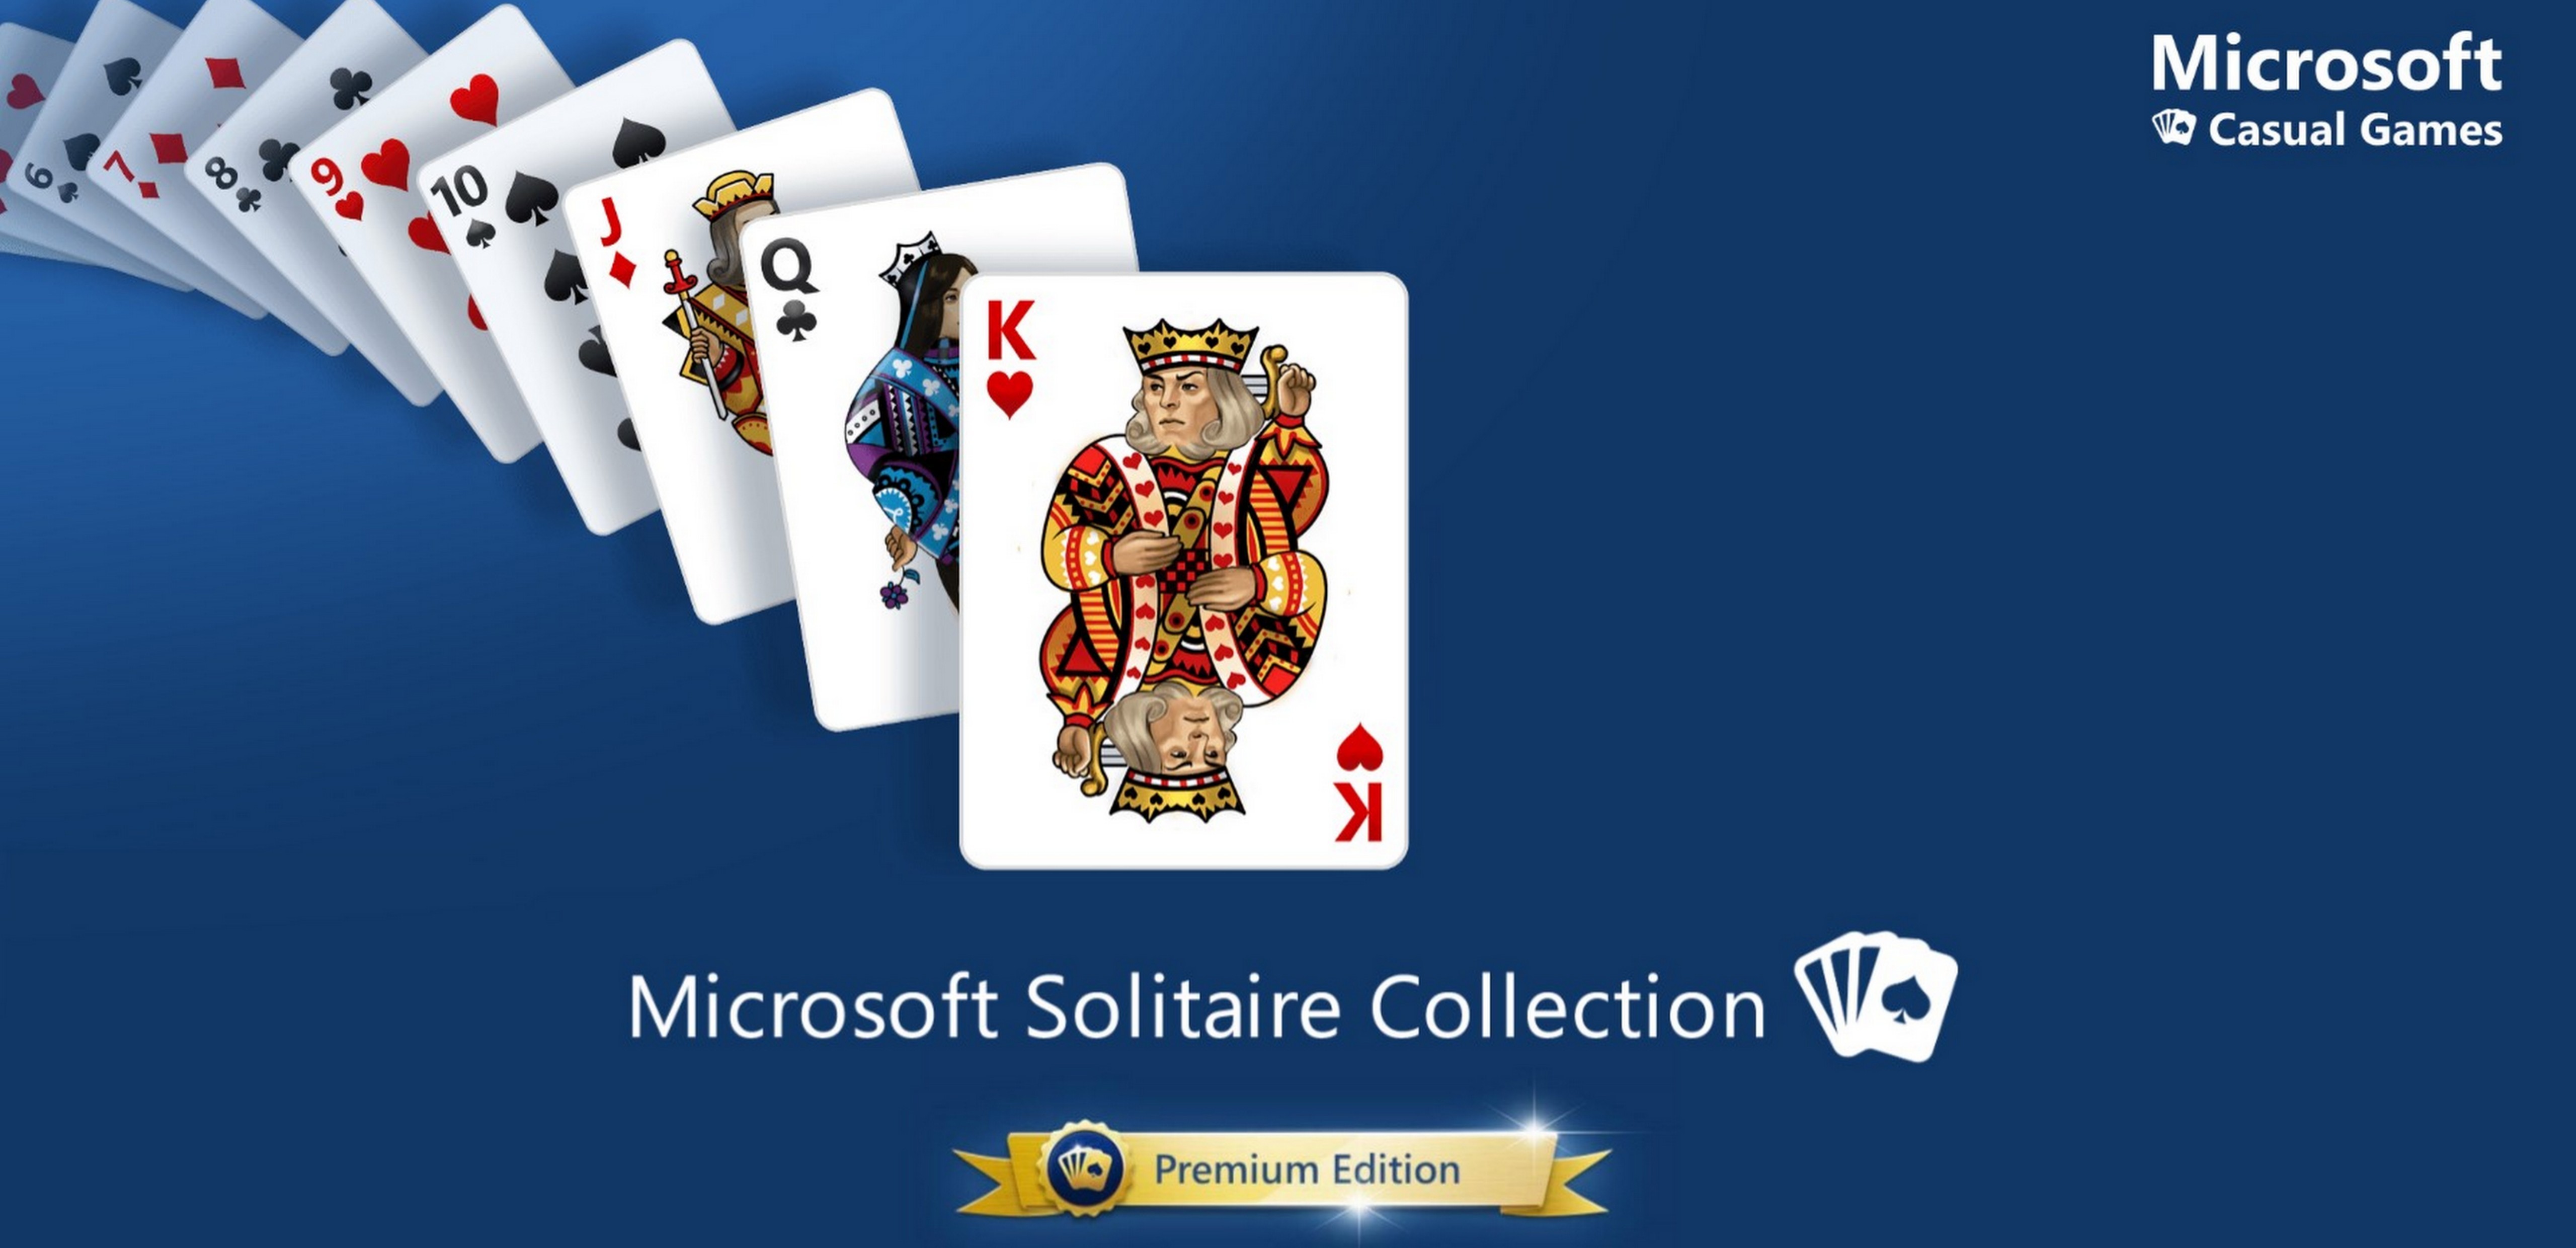 Expensive and Useless Micro-transactions - From Free to Paid (Solitaire On Windows 10)